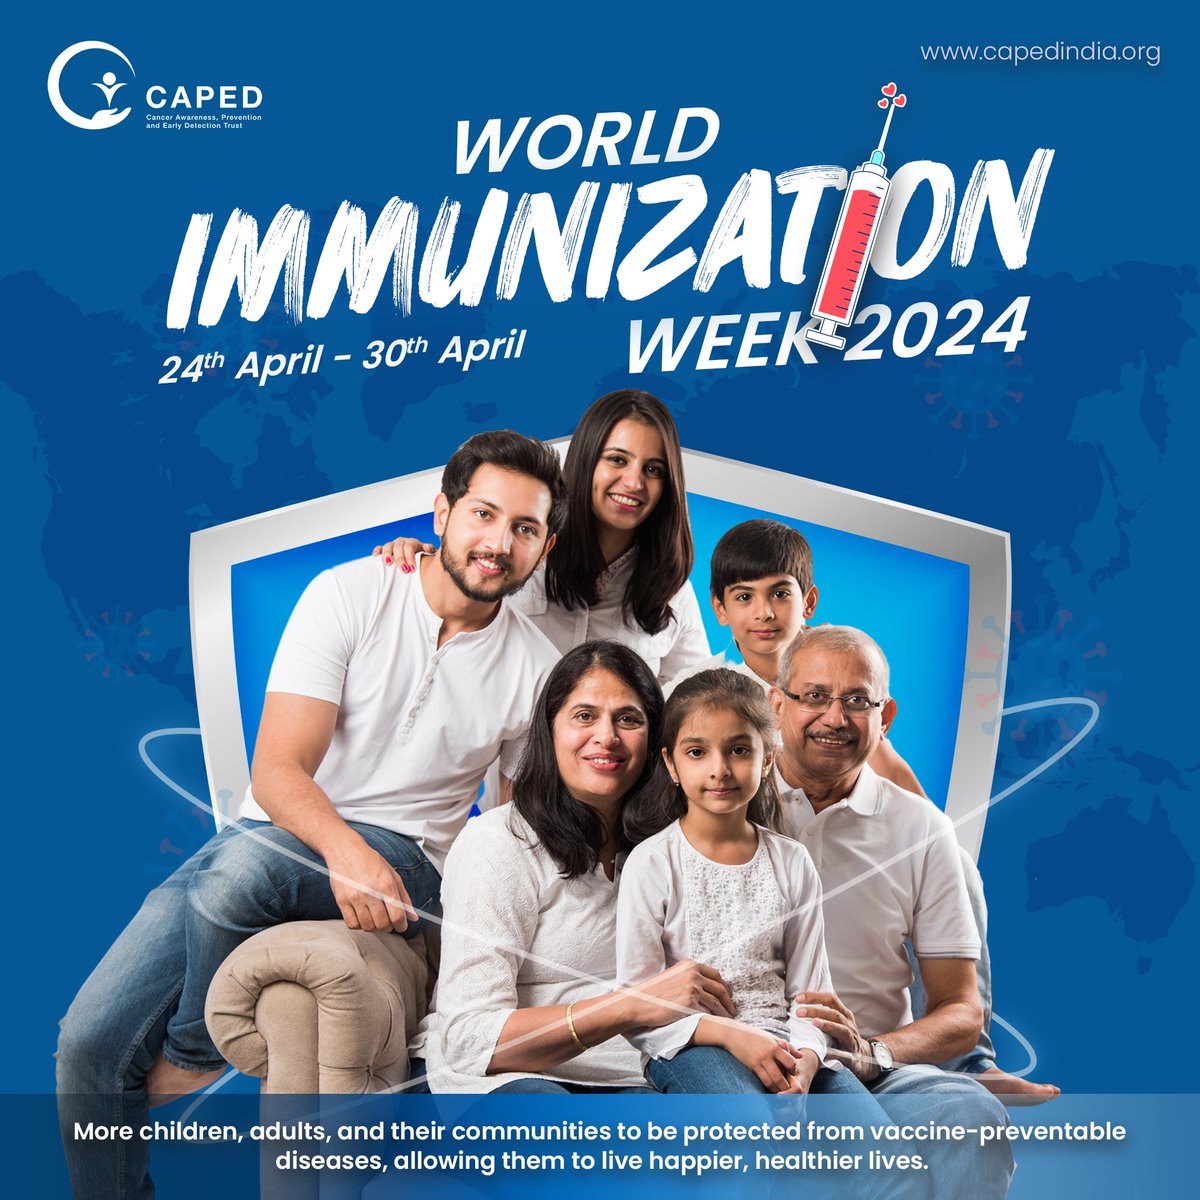 This #WorldImmunizationWeek, let's #CancelCervicalCancer!

Vaccines are the key to building a healthy community! They've eradicated diseases like smallpox & polio, and now it's #HPV's turn. Get vaccinated and protect yourself from #cervicalcancer.

#ImmunizationWeek #WIW #WIW2024